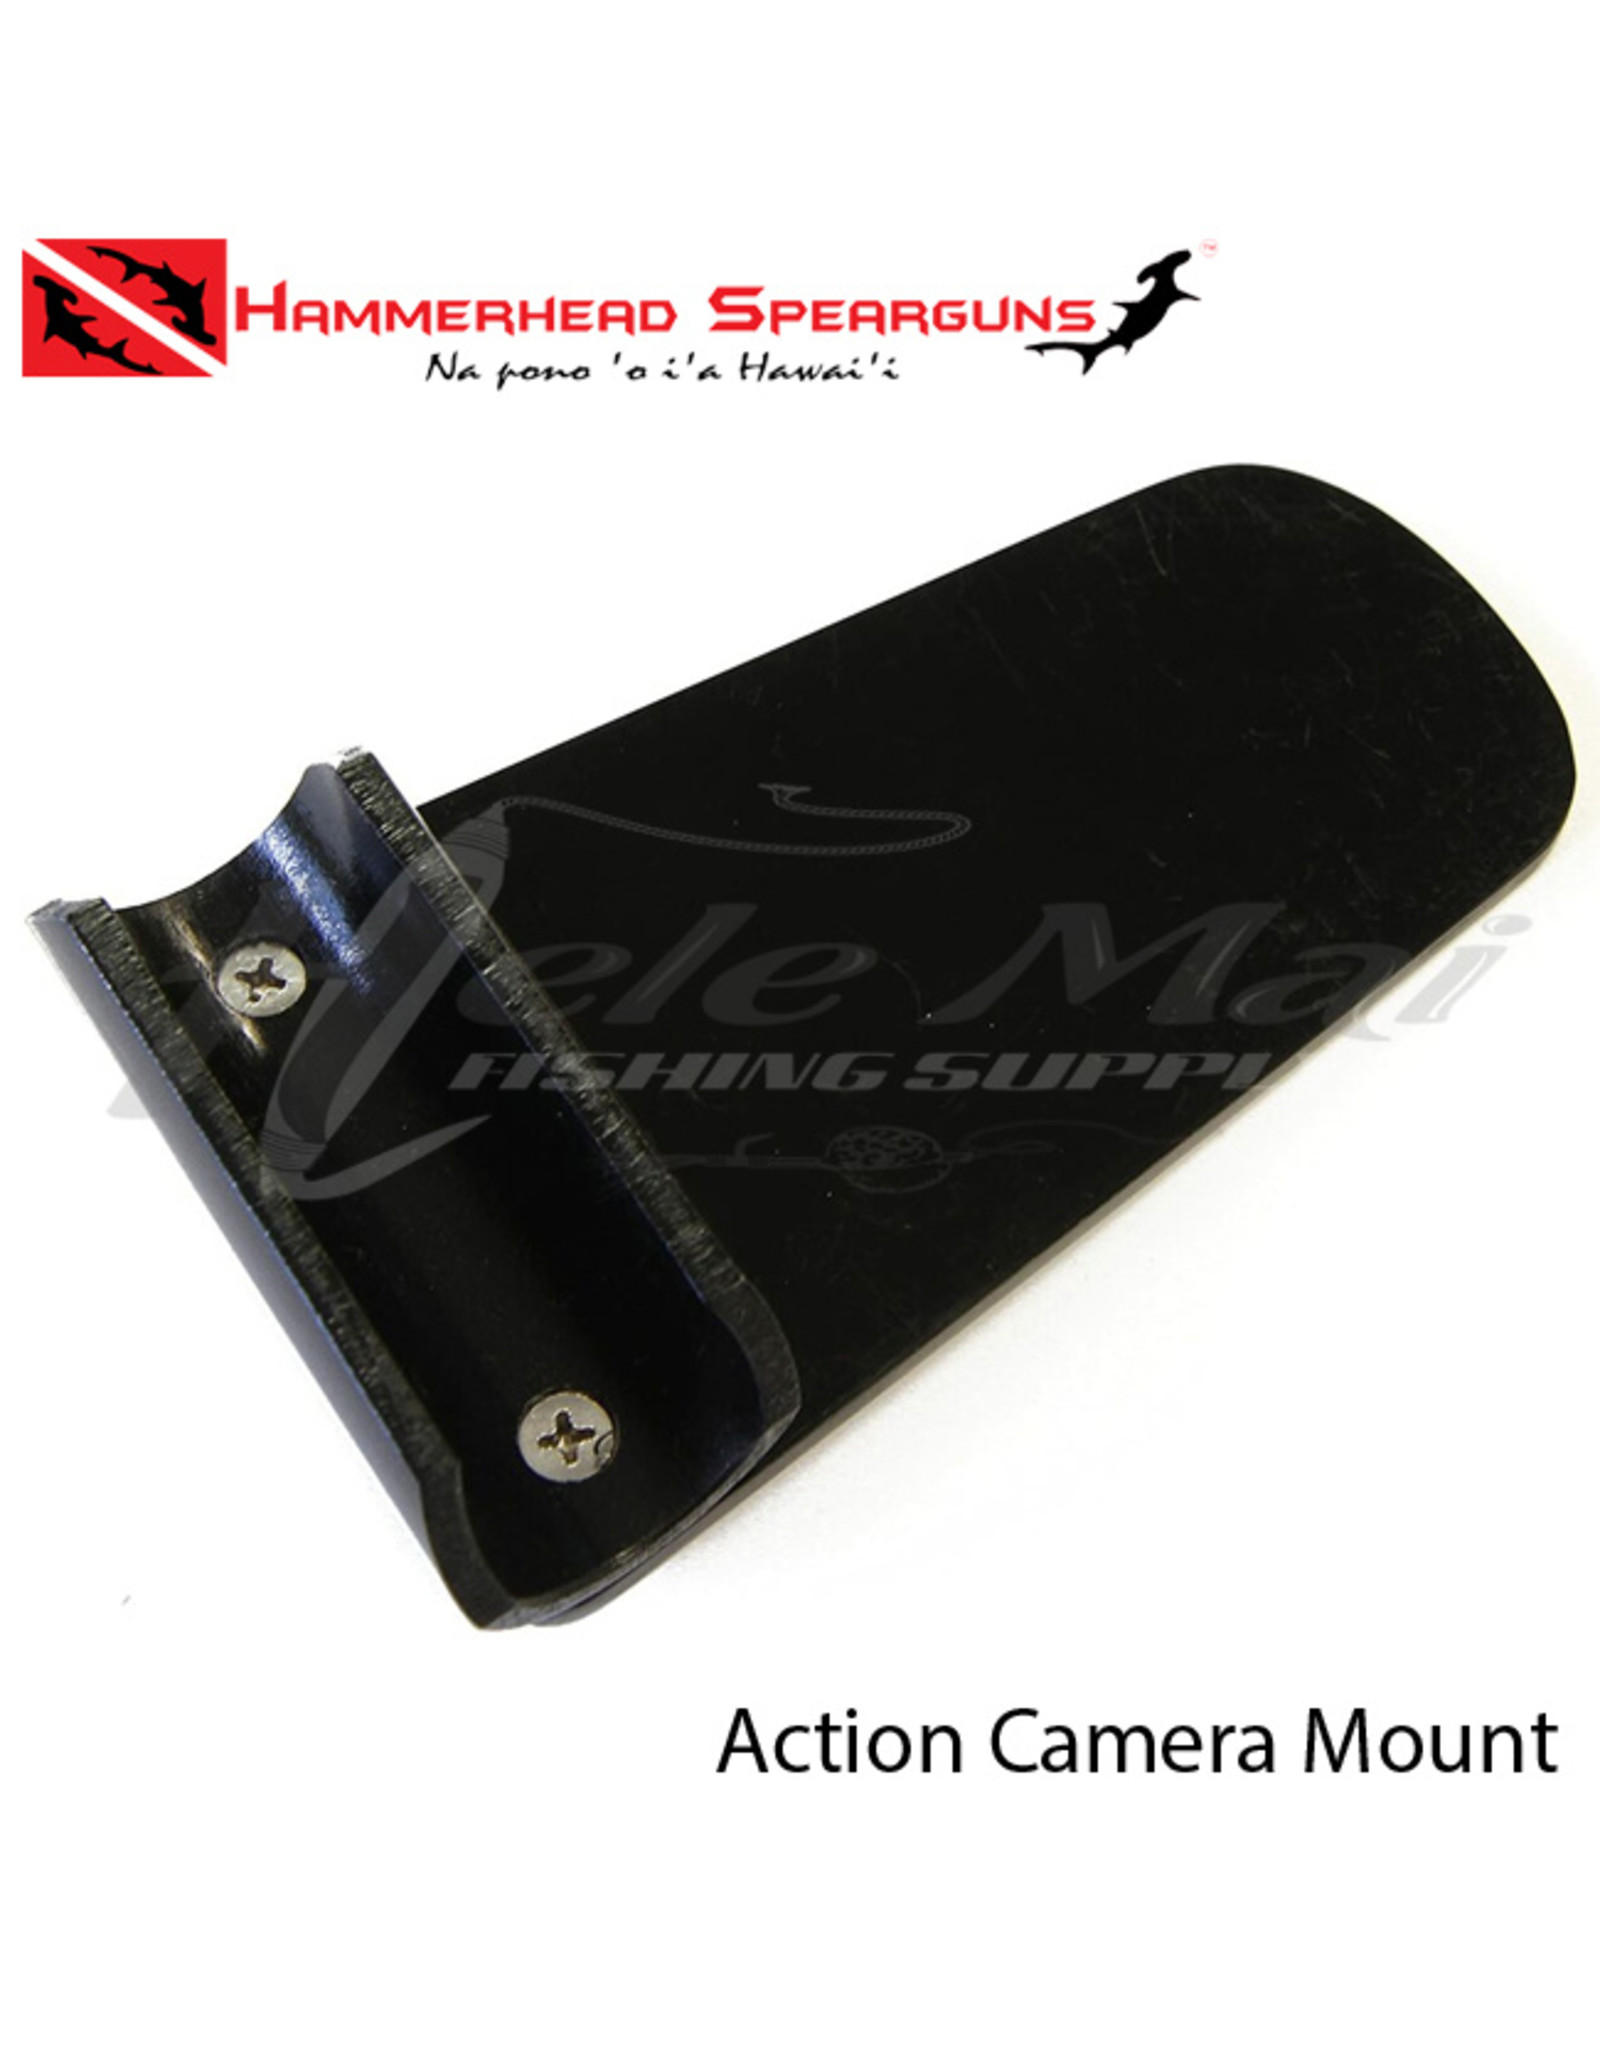 HAMMERHEAD SPEARGUNS HHS, ACTION CAMERA MOUNT